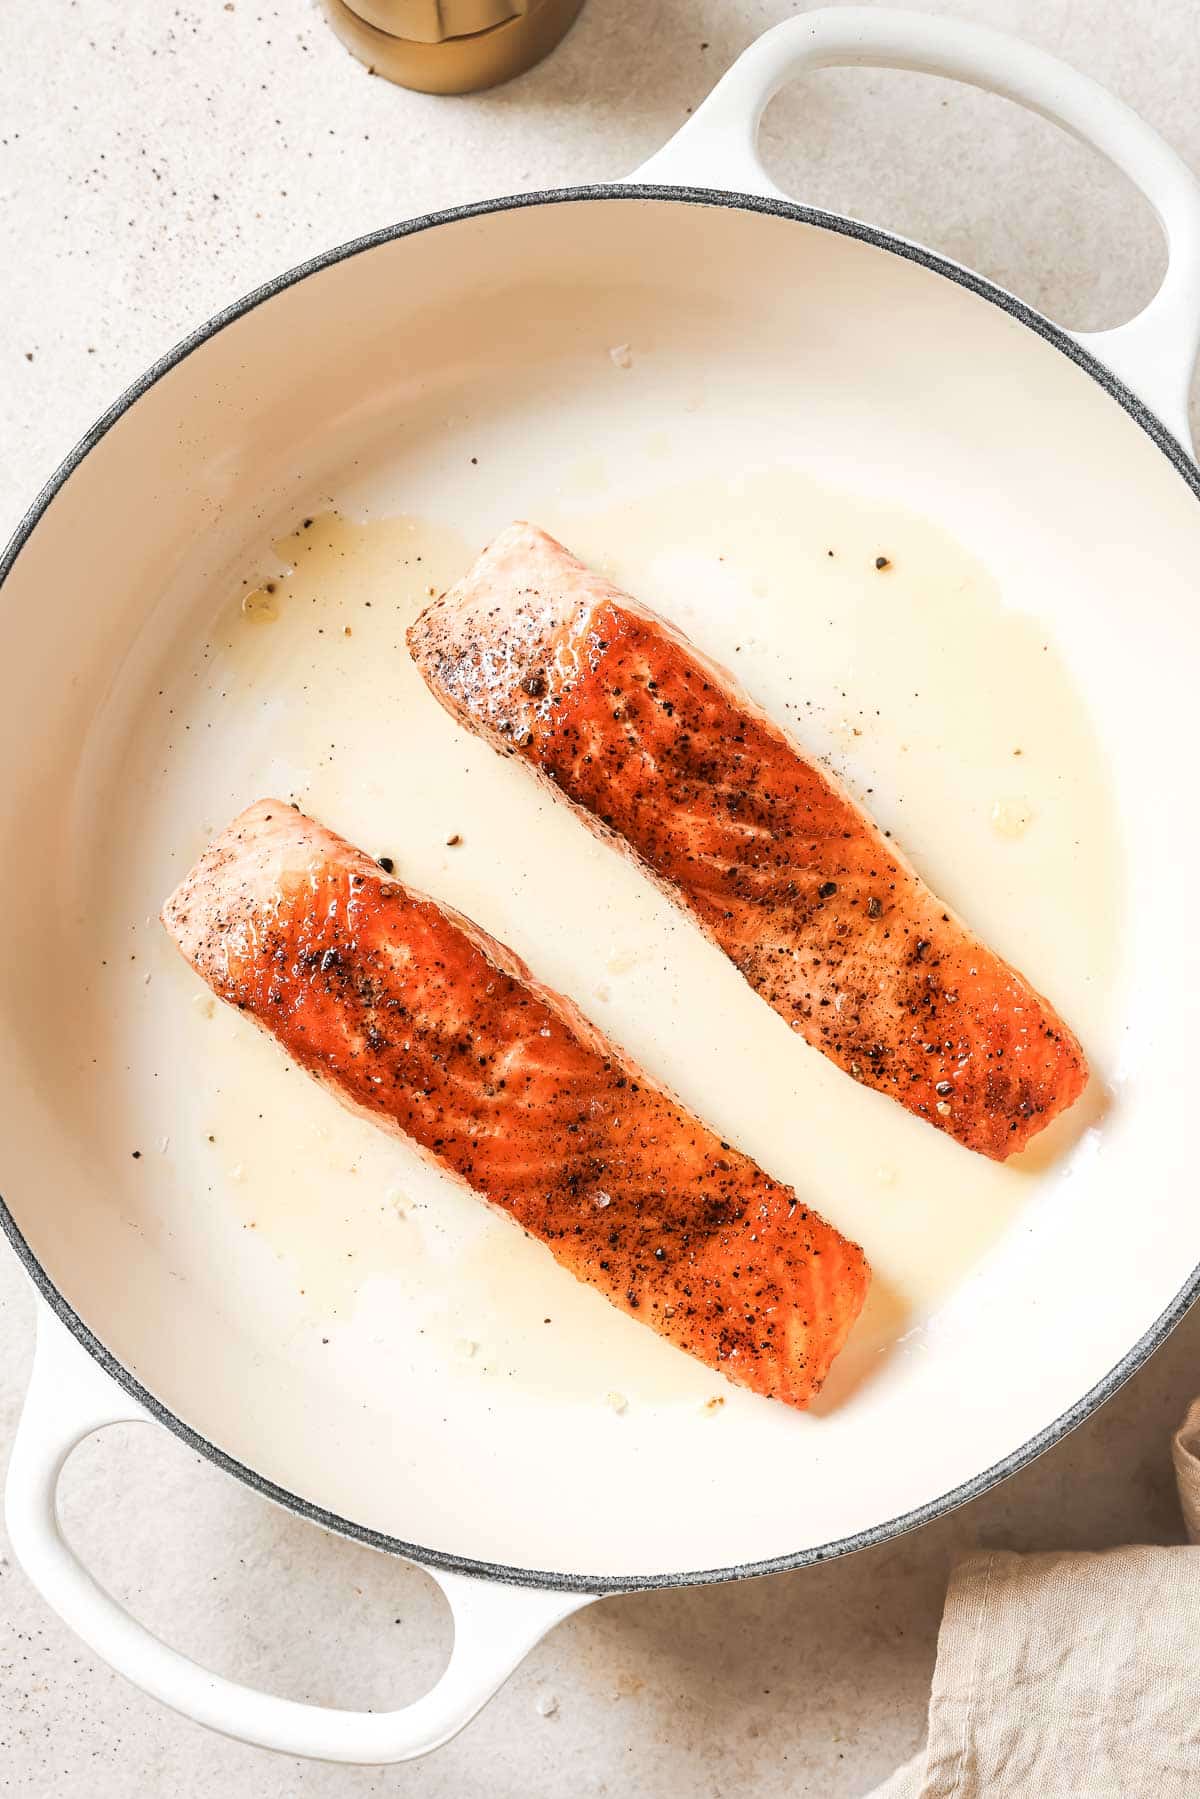 Two salmon fillets are being cooked in a skillet.